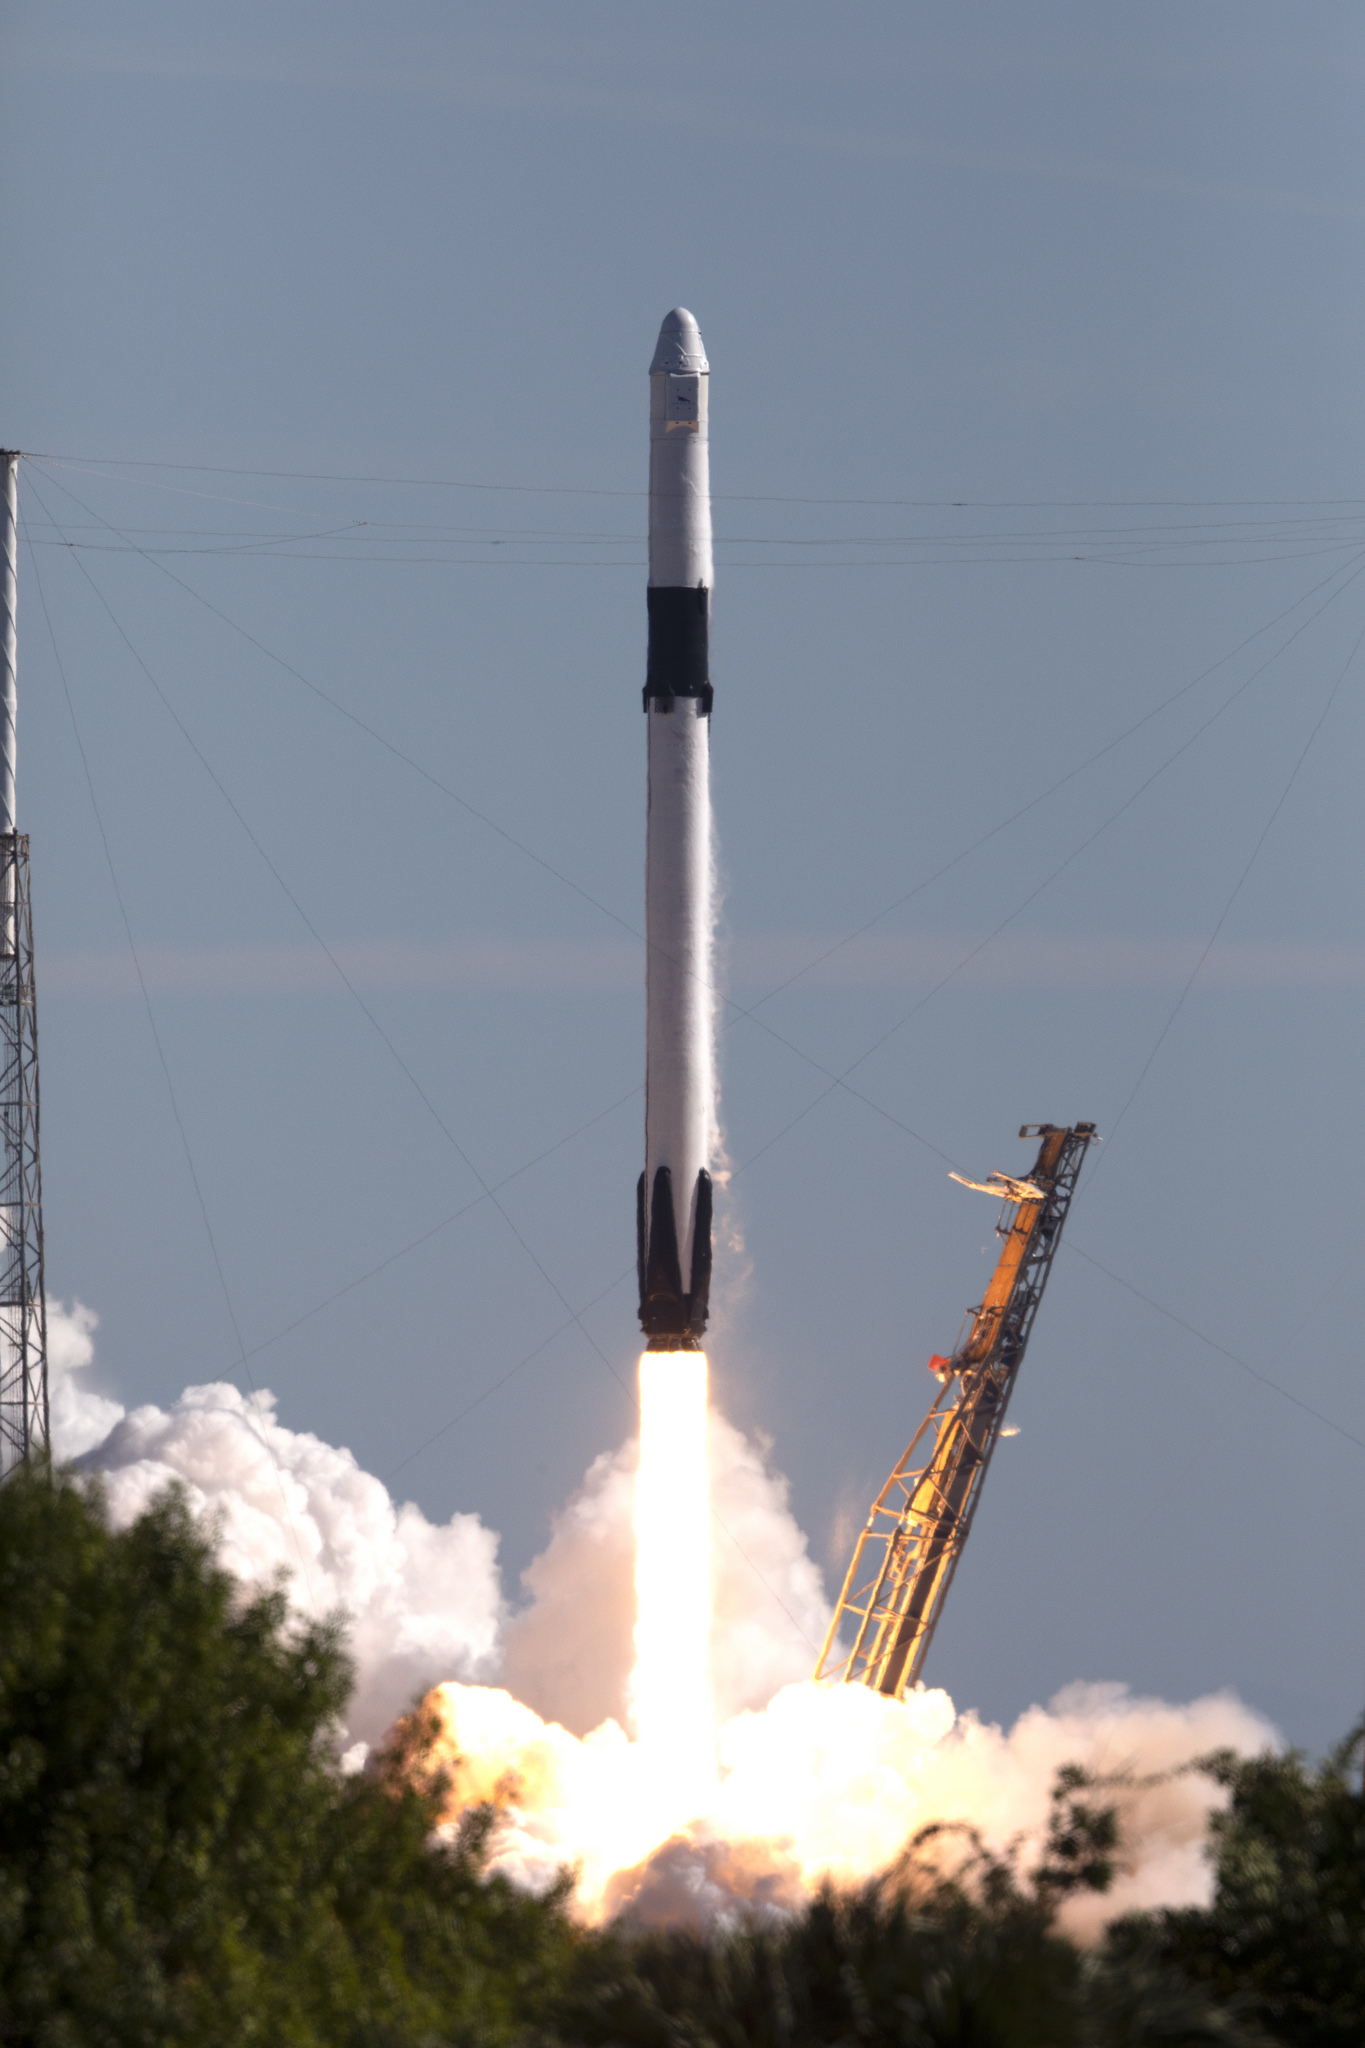 The two-stage Falcon 9 launch vehicle lifts off Space Launch Complex 40 at Cape Canaveral Air Force Statio